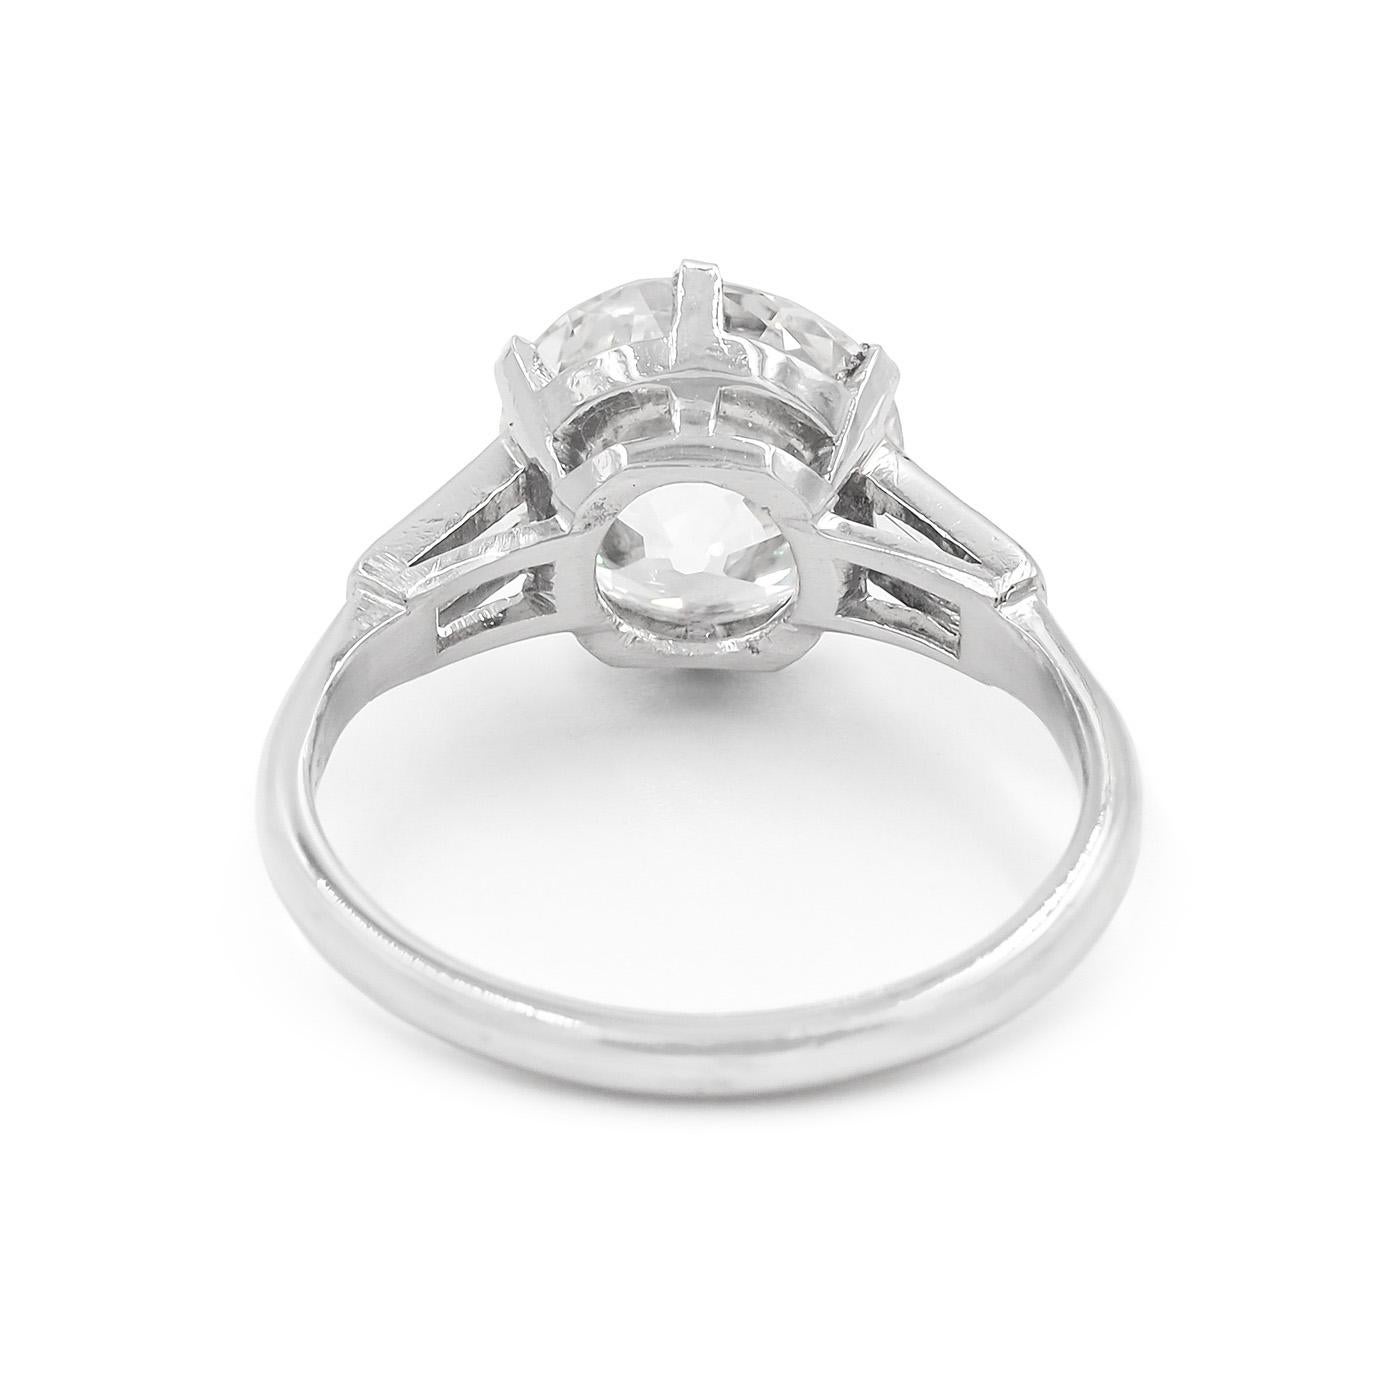 Art Deco 3.01 Carat Old European Cut Diamond Engagement Ring by Tiffany & Co. For Sale 3